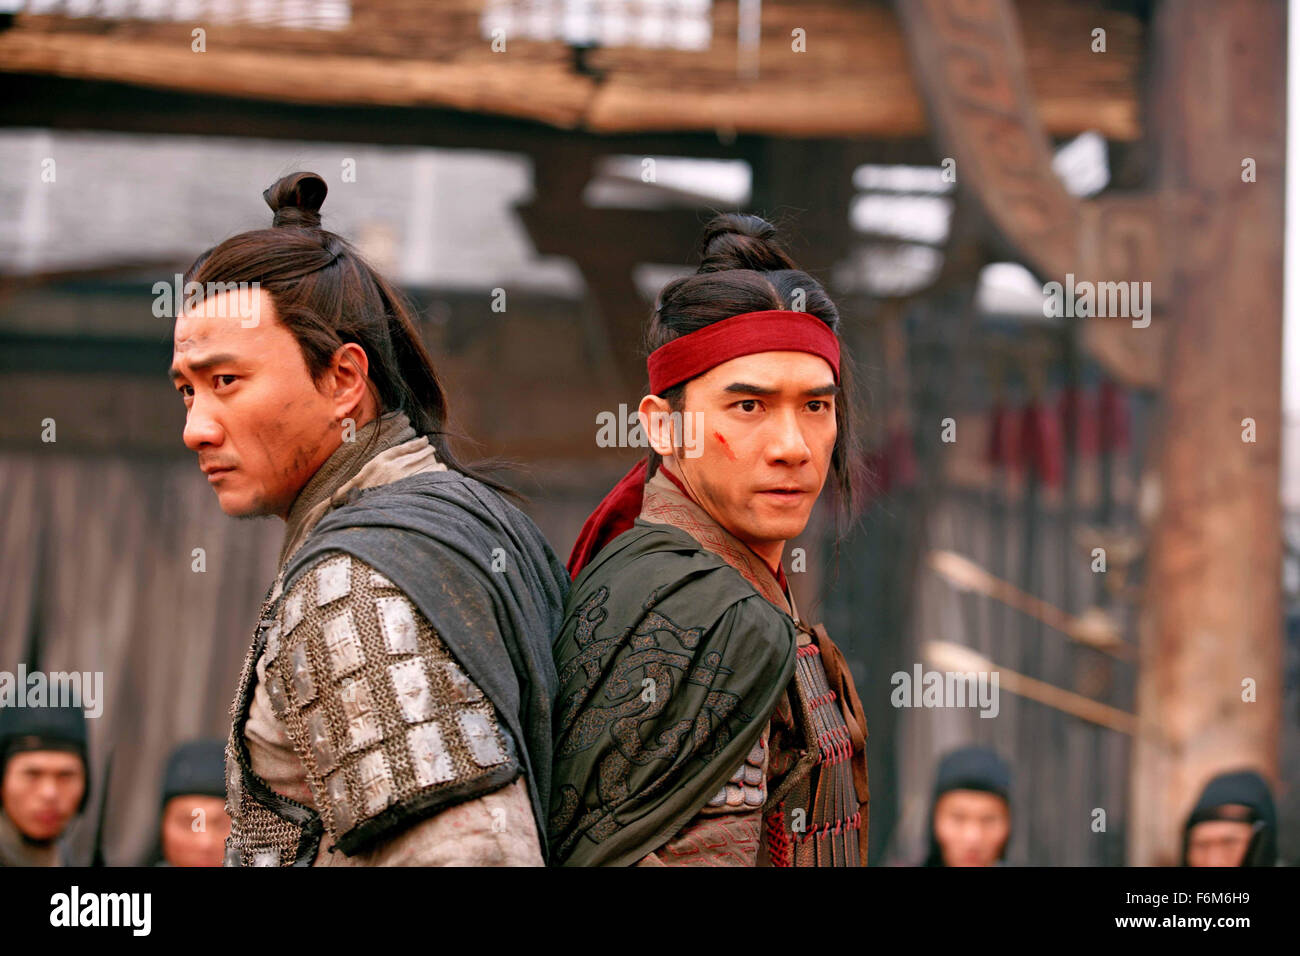 RELEASE DATE: July 10, 2008. MOVIE TITLE: Red Cliff. STUDIO: Avex Entertainment. PLOT: Based on the events during the Three Kingdoms period in Ancient China in which specifically told in the title, The Battle of Red Cliffs. PICTURED: TONY LEUNG as Zhou Yu and HU JUN as Zhao Yun. Stock Photo